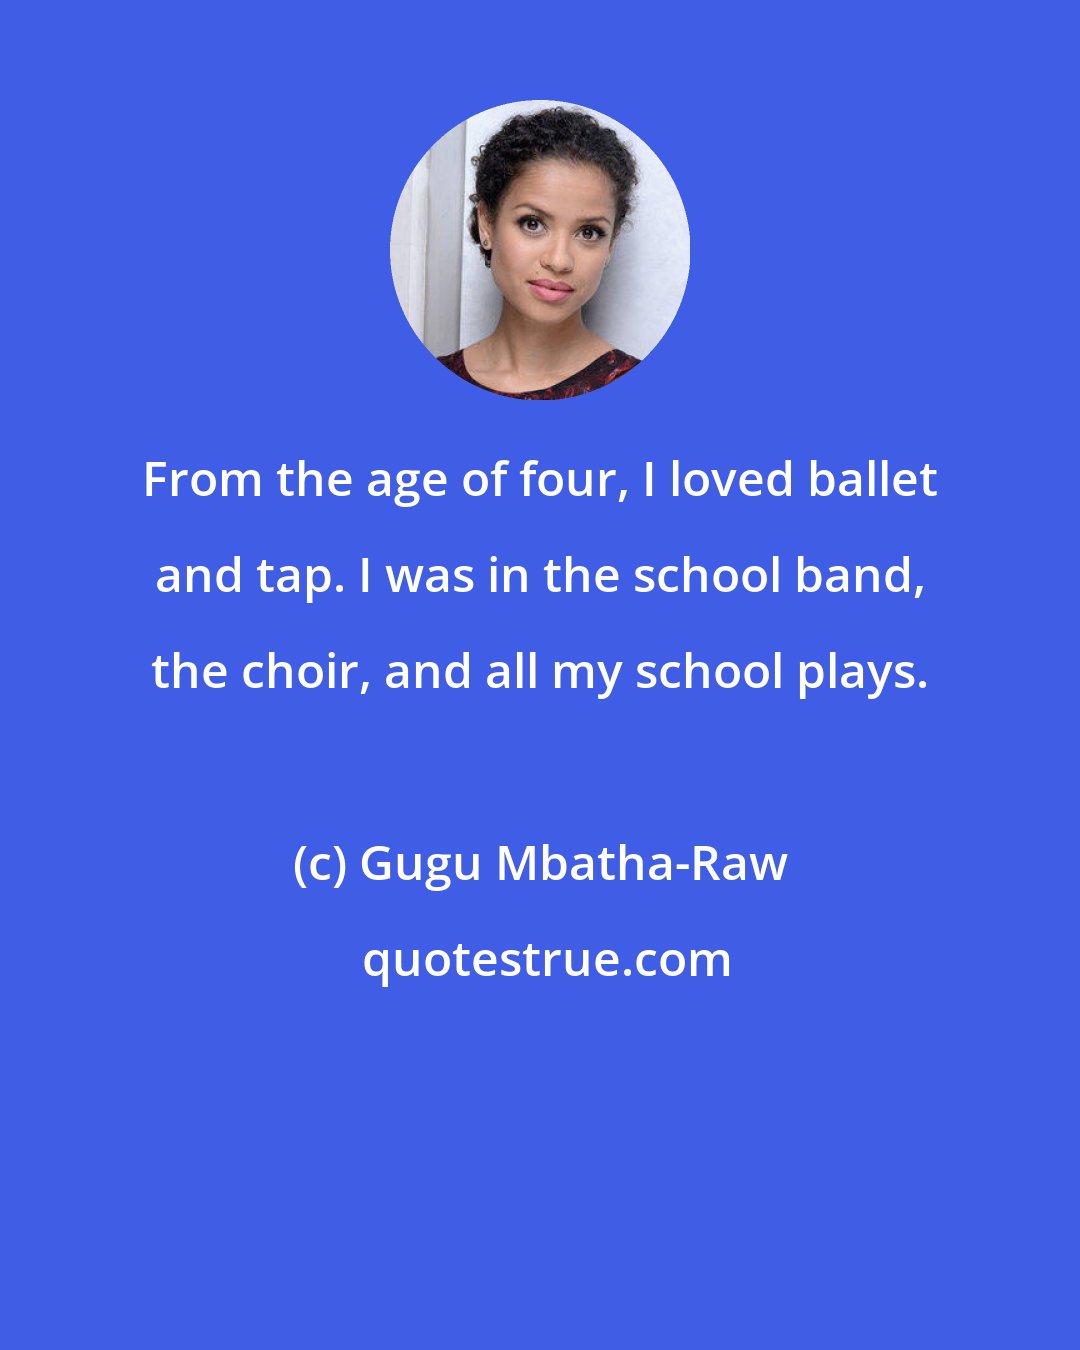 Gugu Mbatha-Raw: From the age of four, I loved ballet and tap. I was in the school band, the choir, and all my school plays.